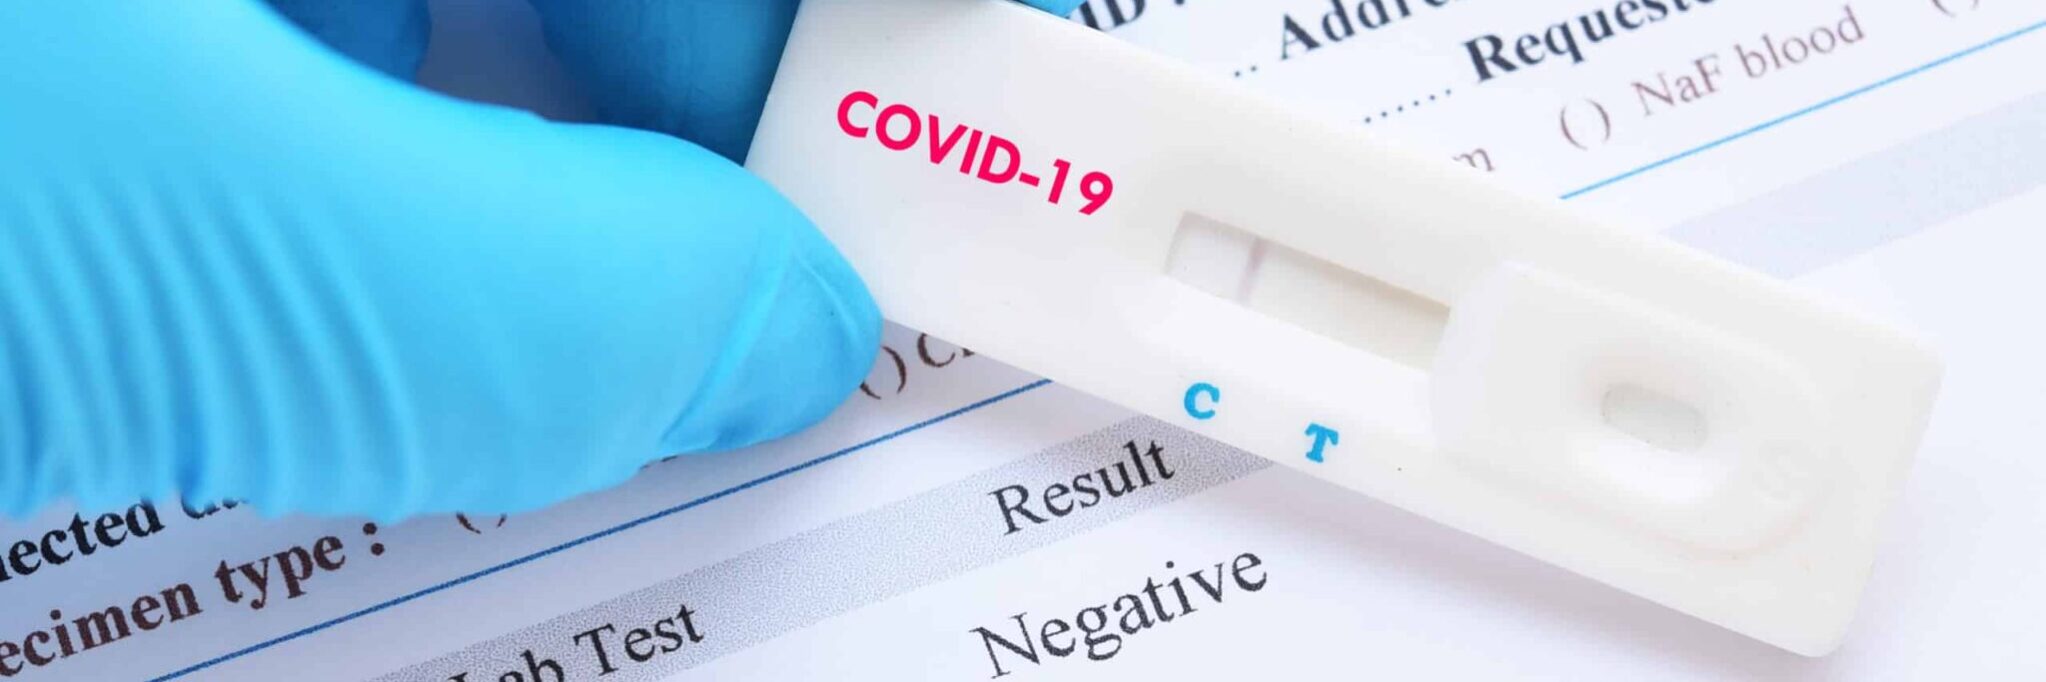 Medical Negligence and COVID 19